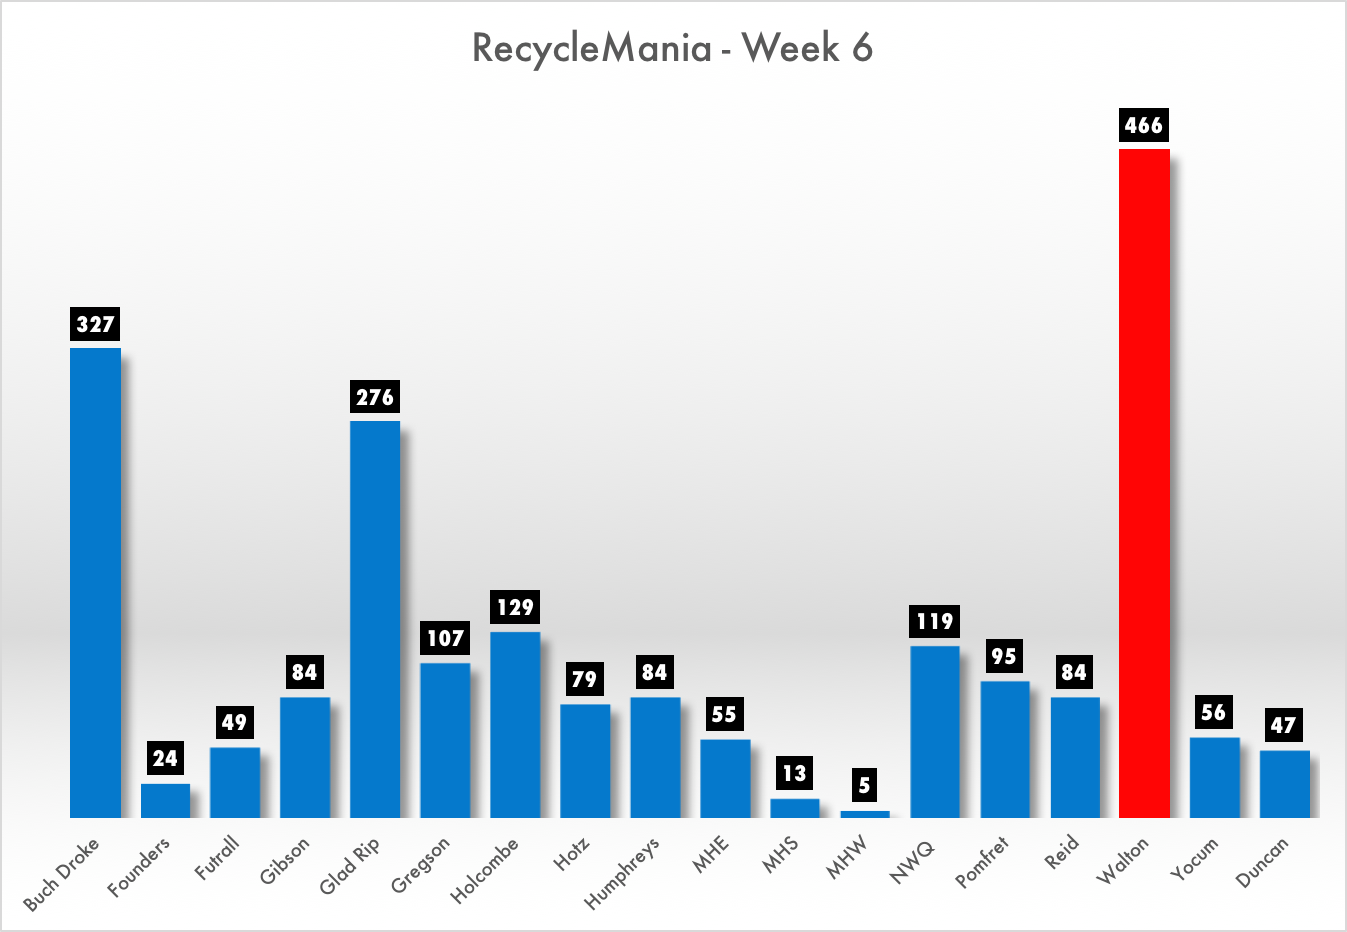 Walton Holds the Lead | RecycleMania Week 6